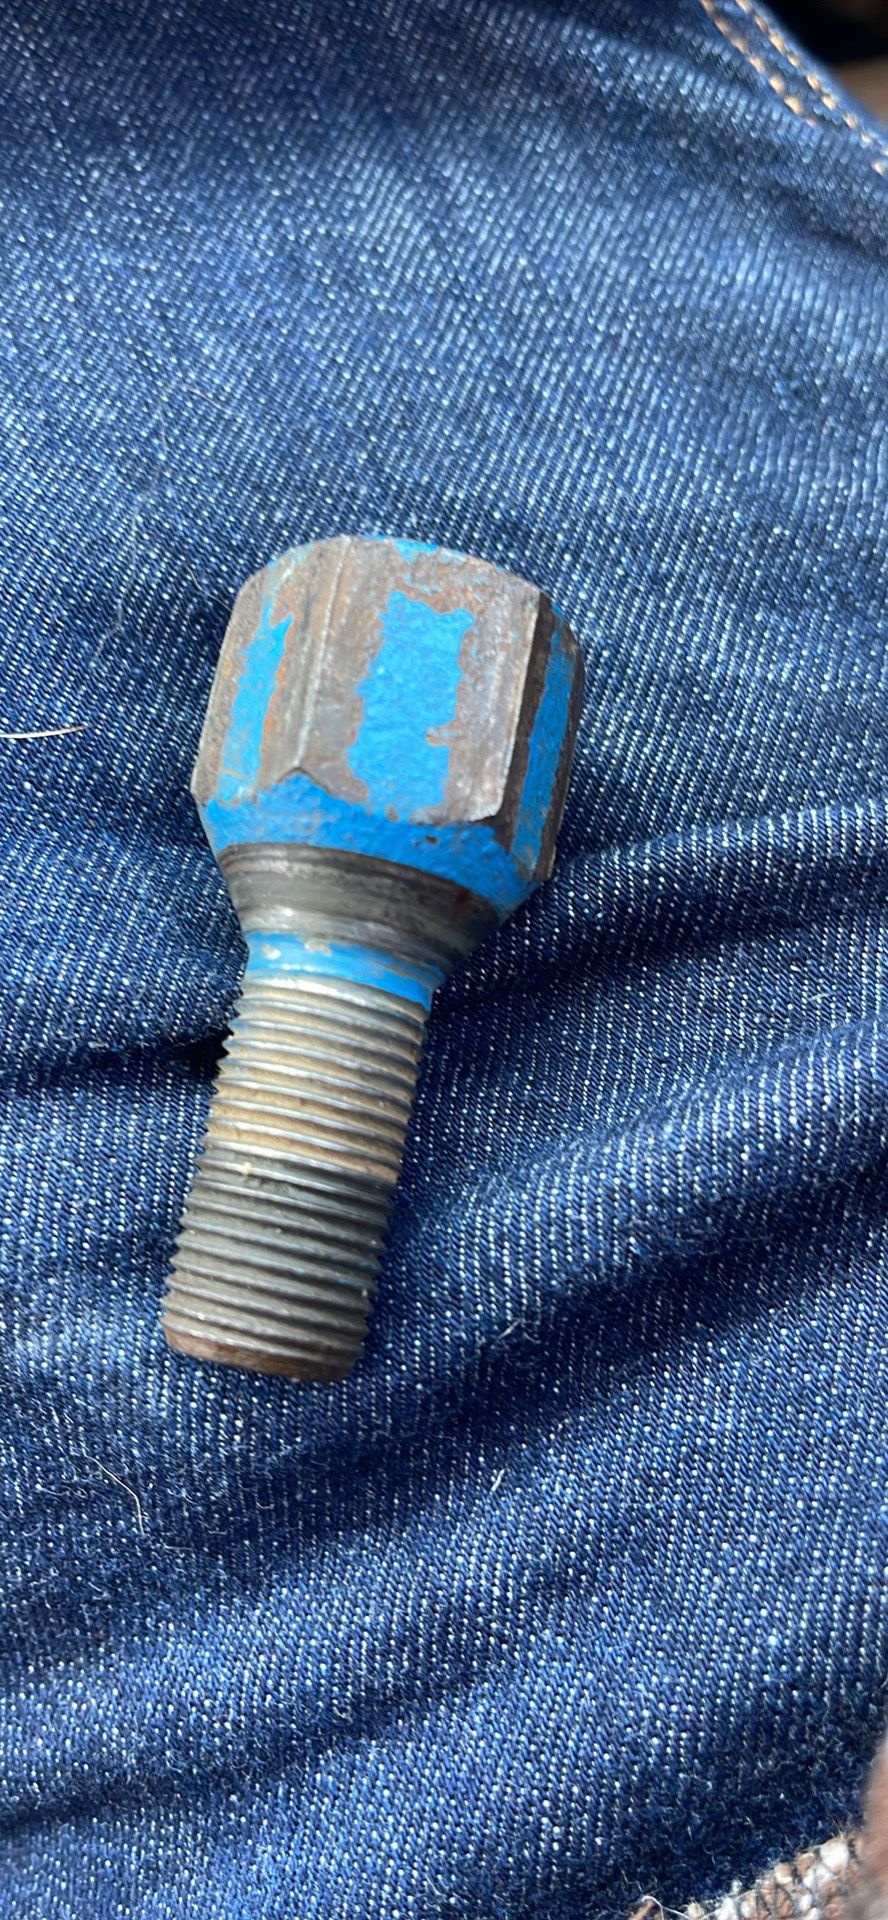 ISO Wheel Lug Stud For Ford 1600 Tractor 